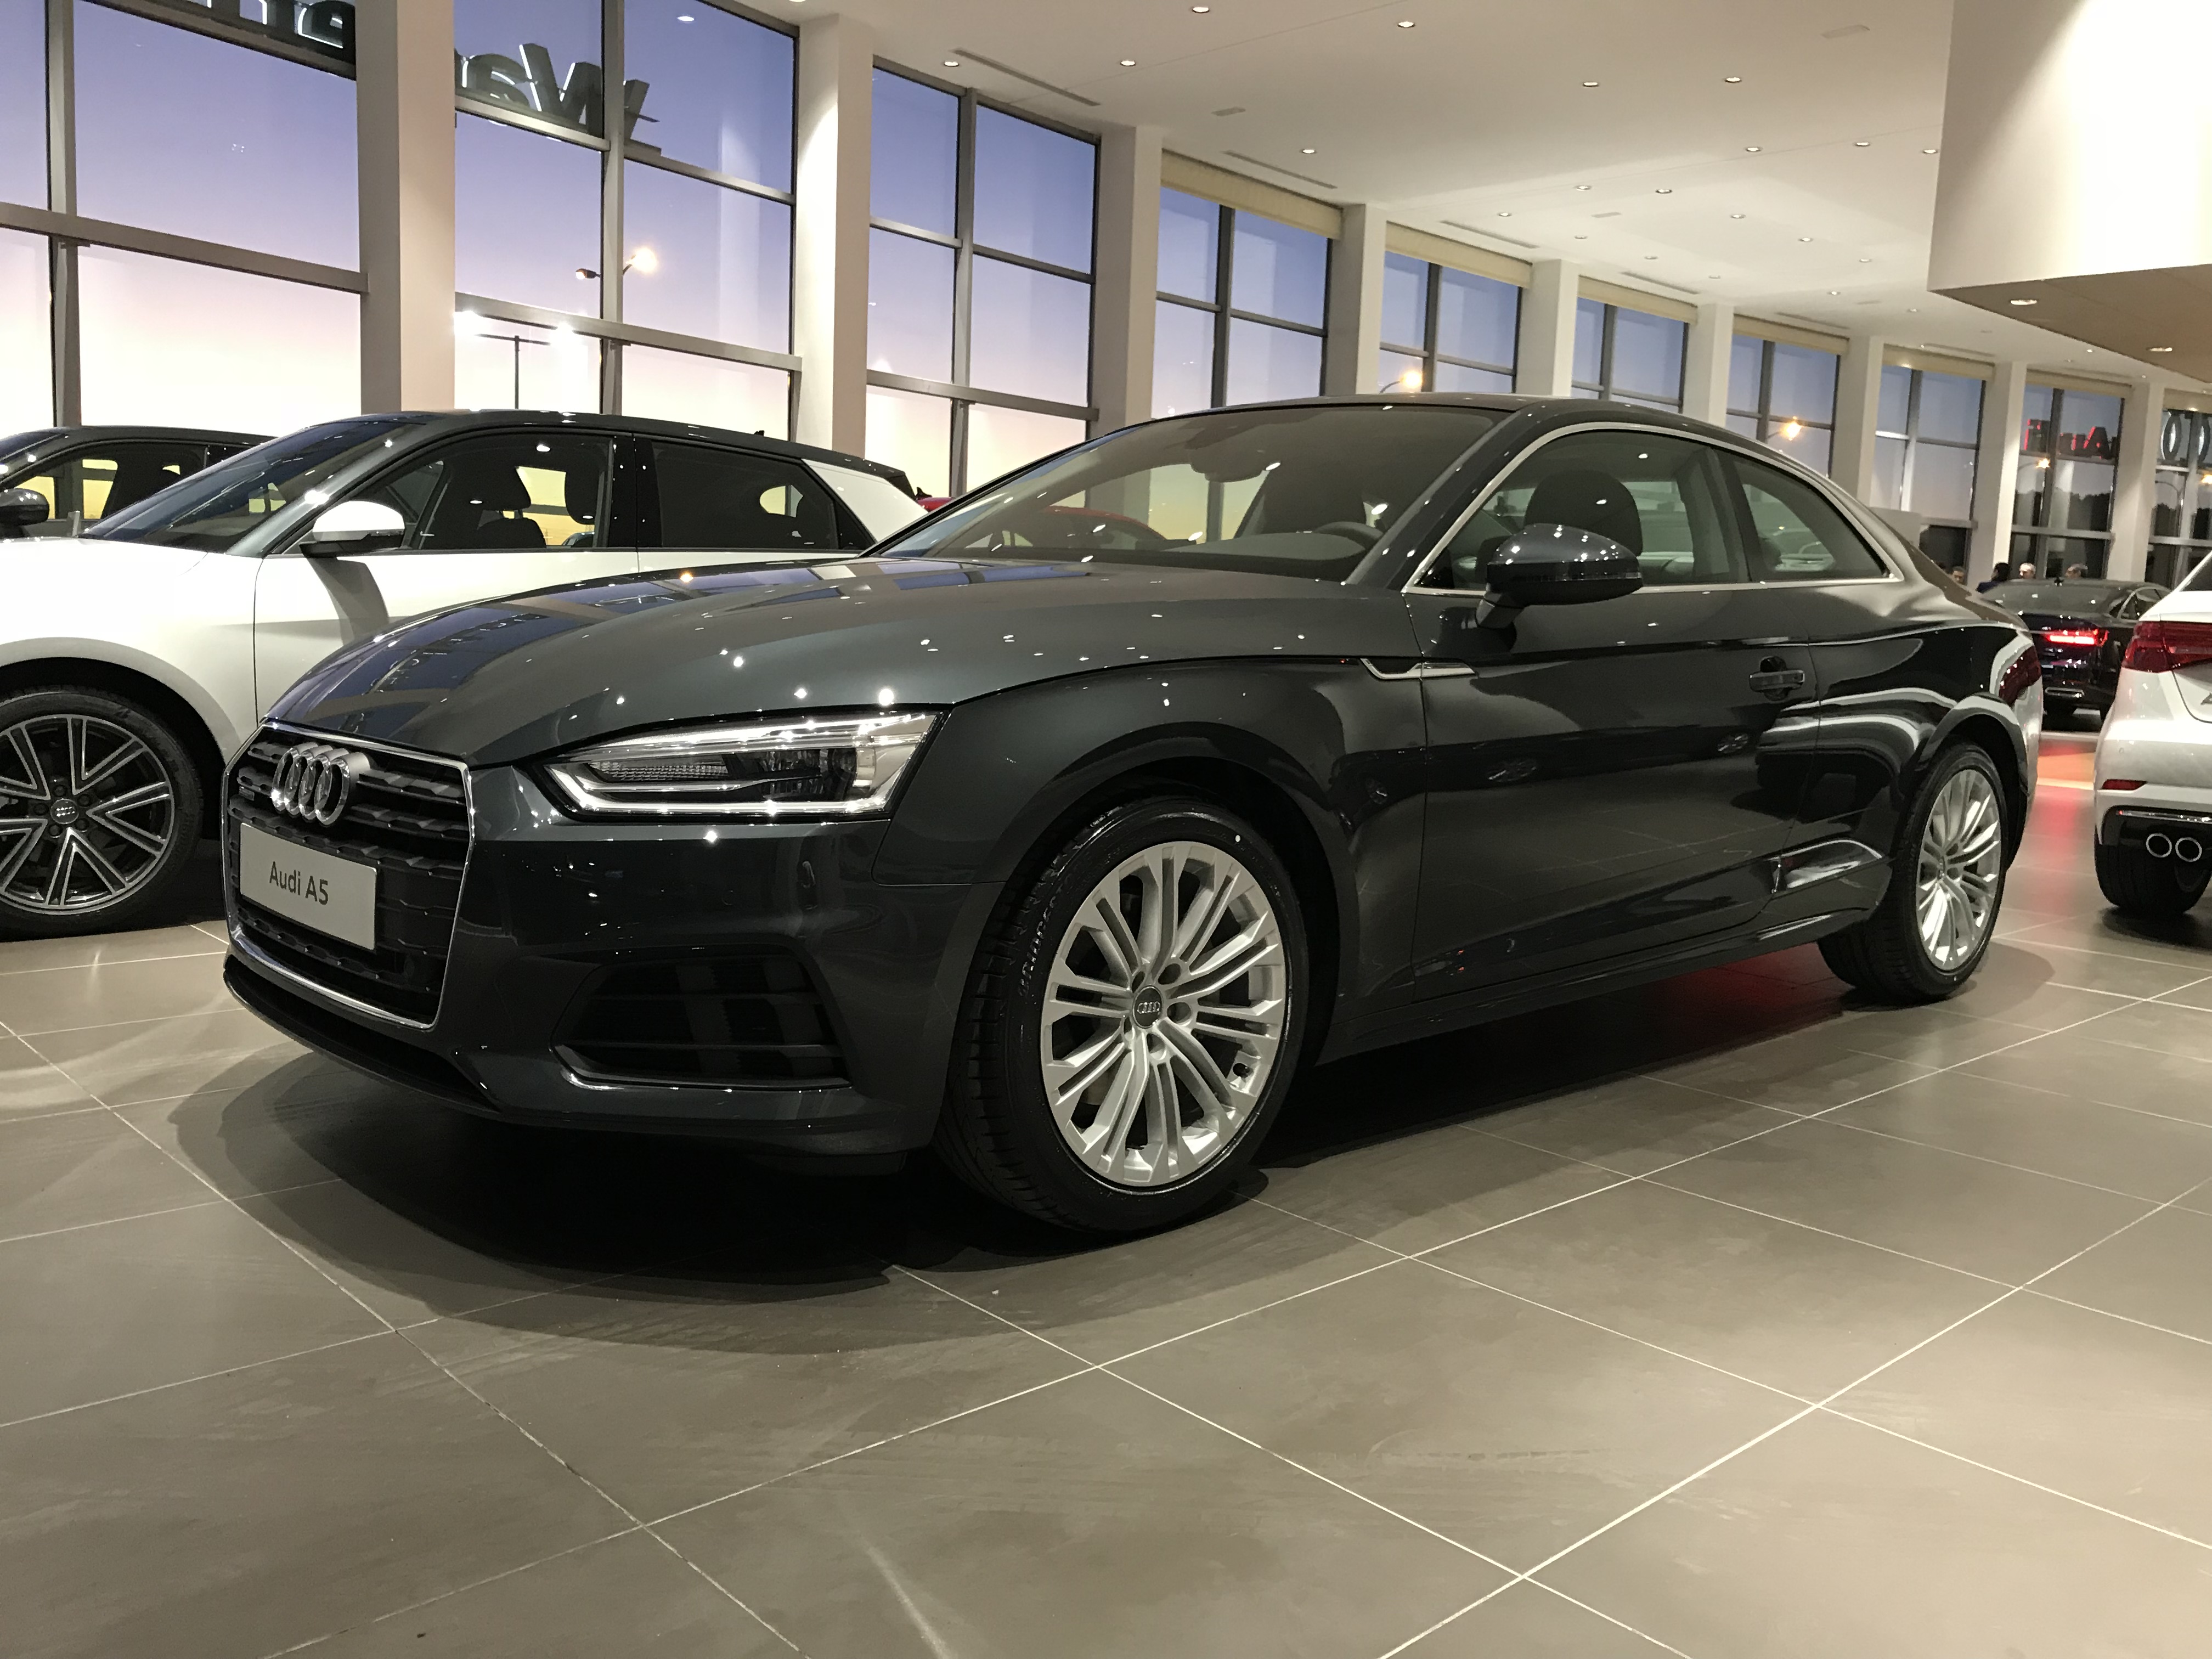 Audi A5 Coupe accessories restyling